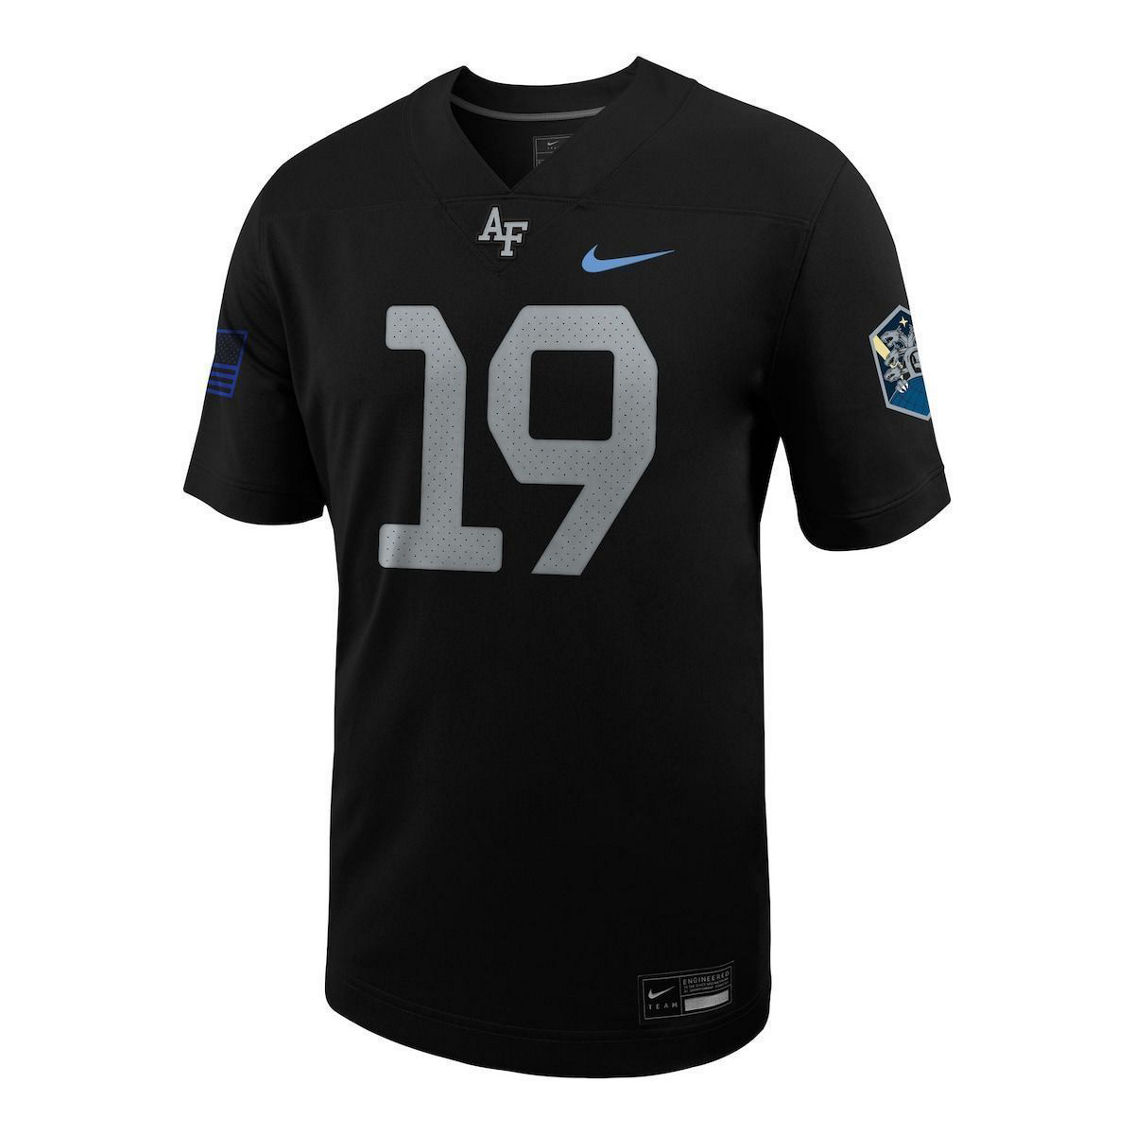 Nike Men's #19 Black Air Force Falcons Space Force Rivalry Alternate Game Football Jersey - Image 3 of 4